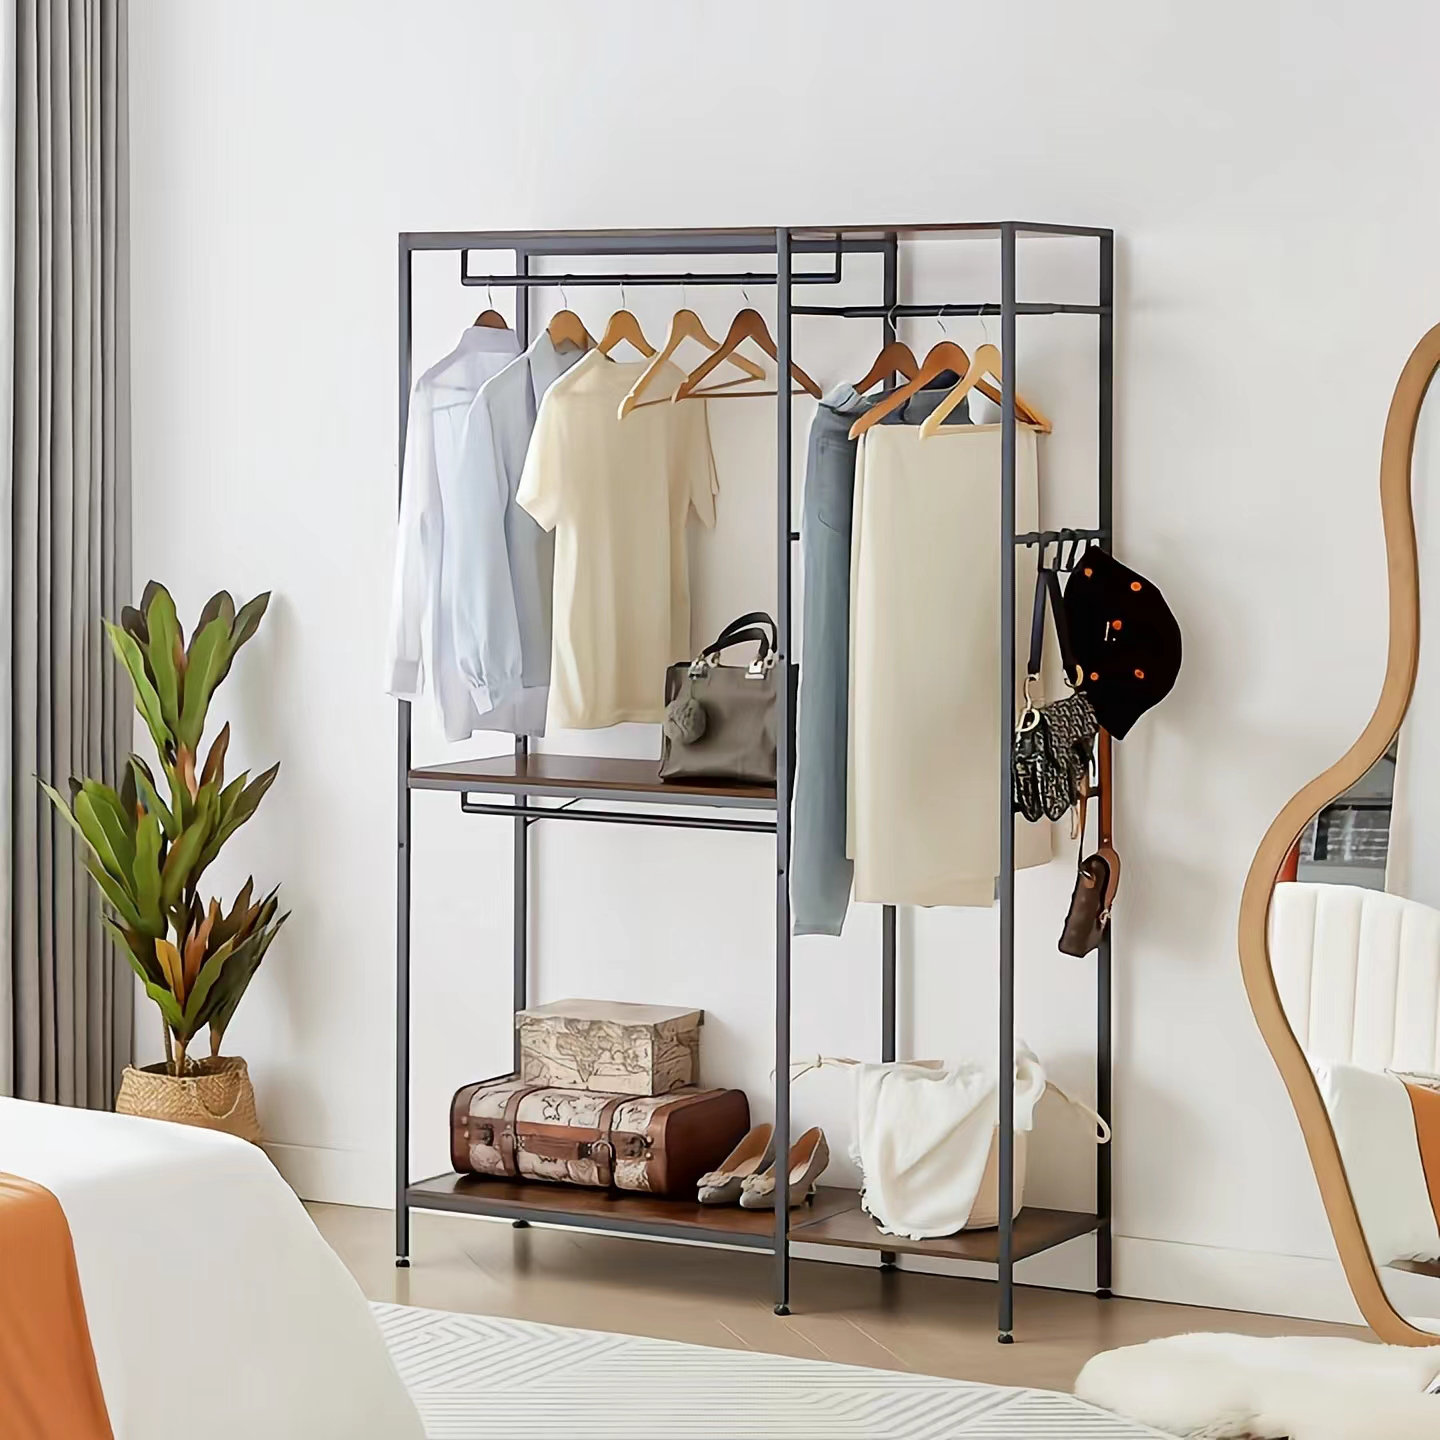 Freestanding Closet Organizer Systems with Shelves, Open Wardrobe Closet for Hanging Clothes 17 Stories